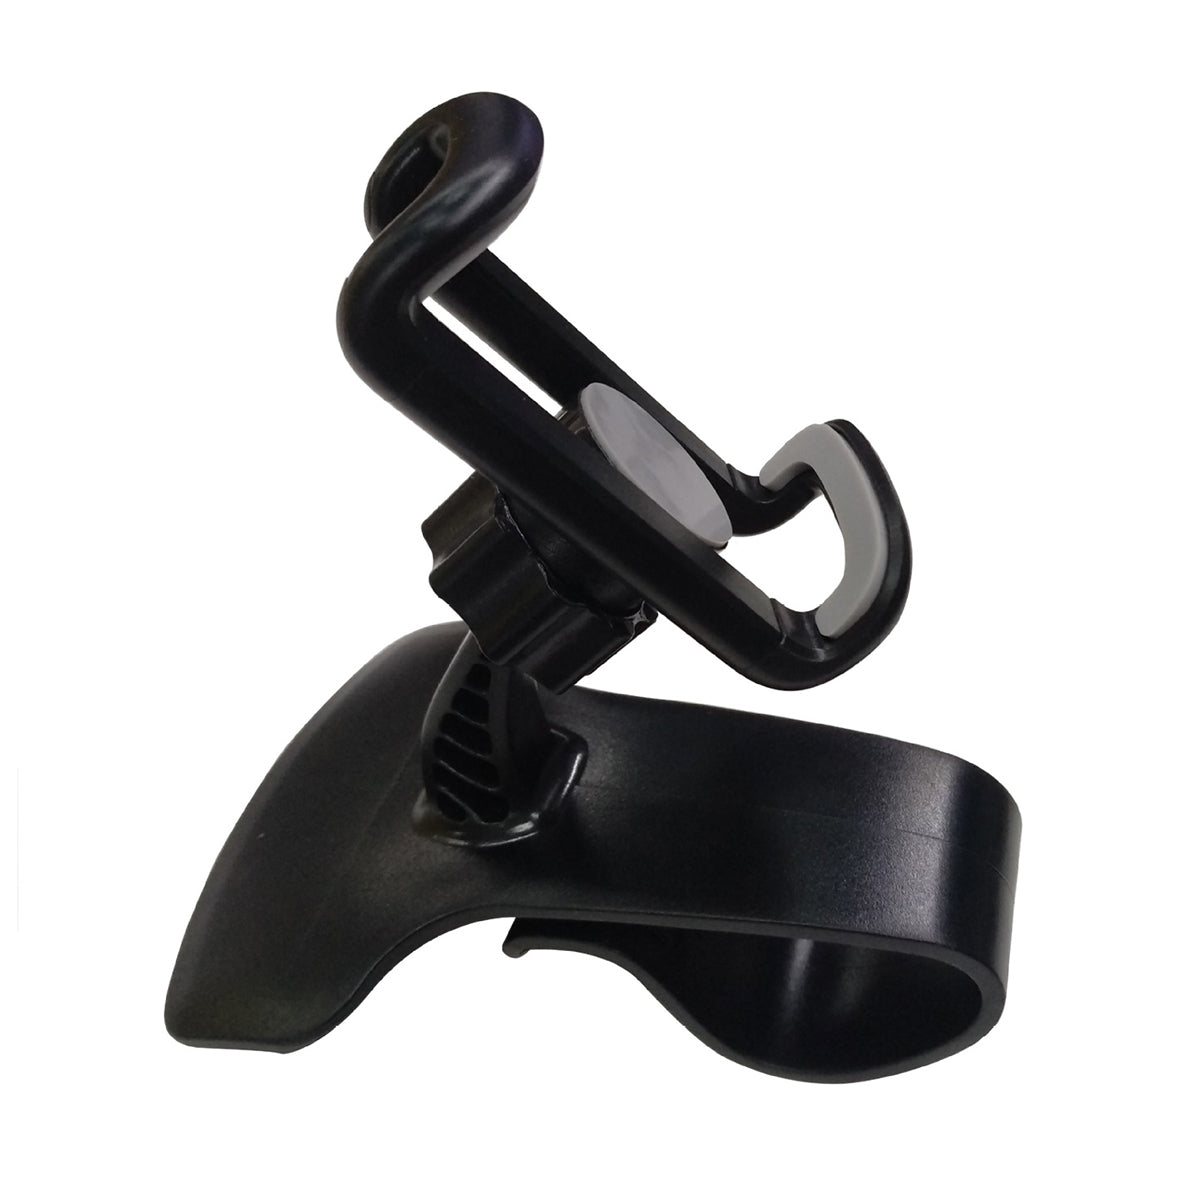 Remax Adjustable Clip 360 Degree Rotation Car Dashabord Holder Mount for Xiaomi Mobile Phone